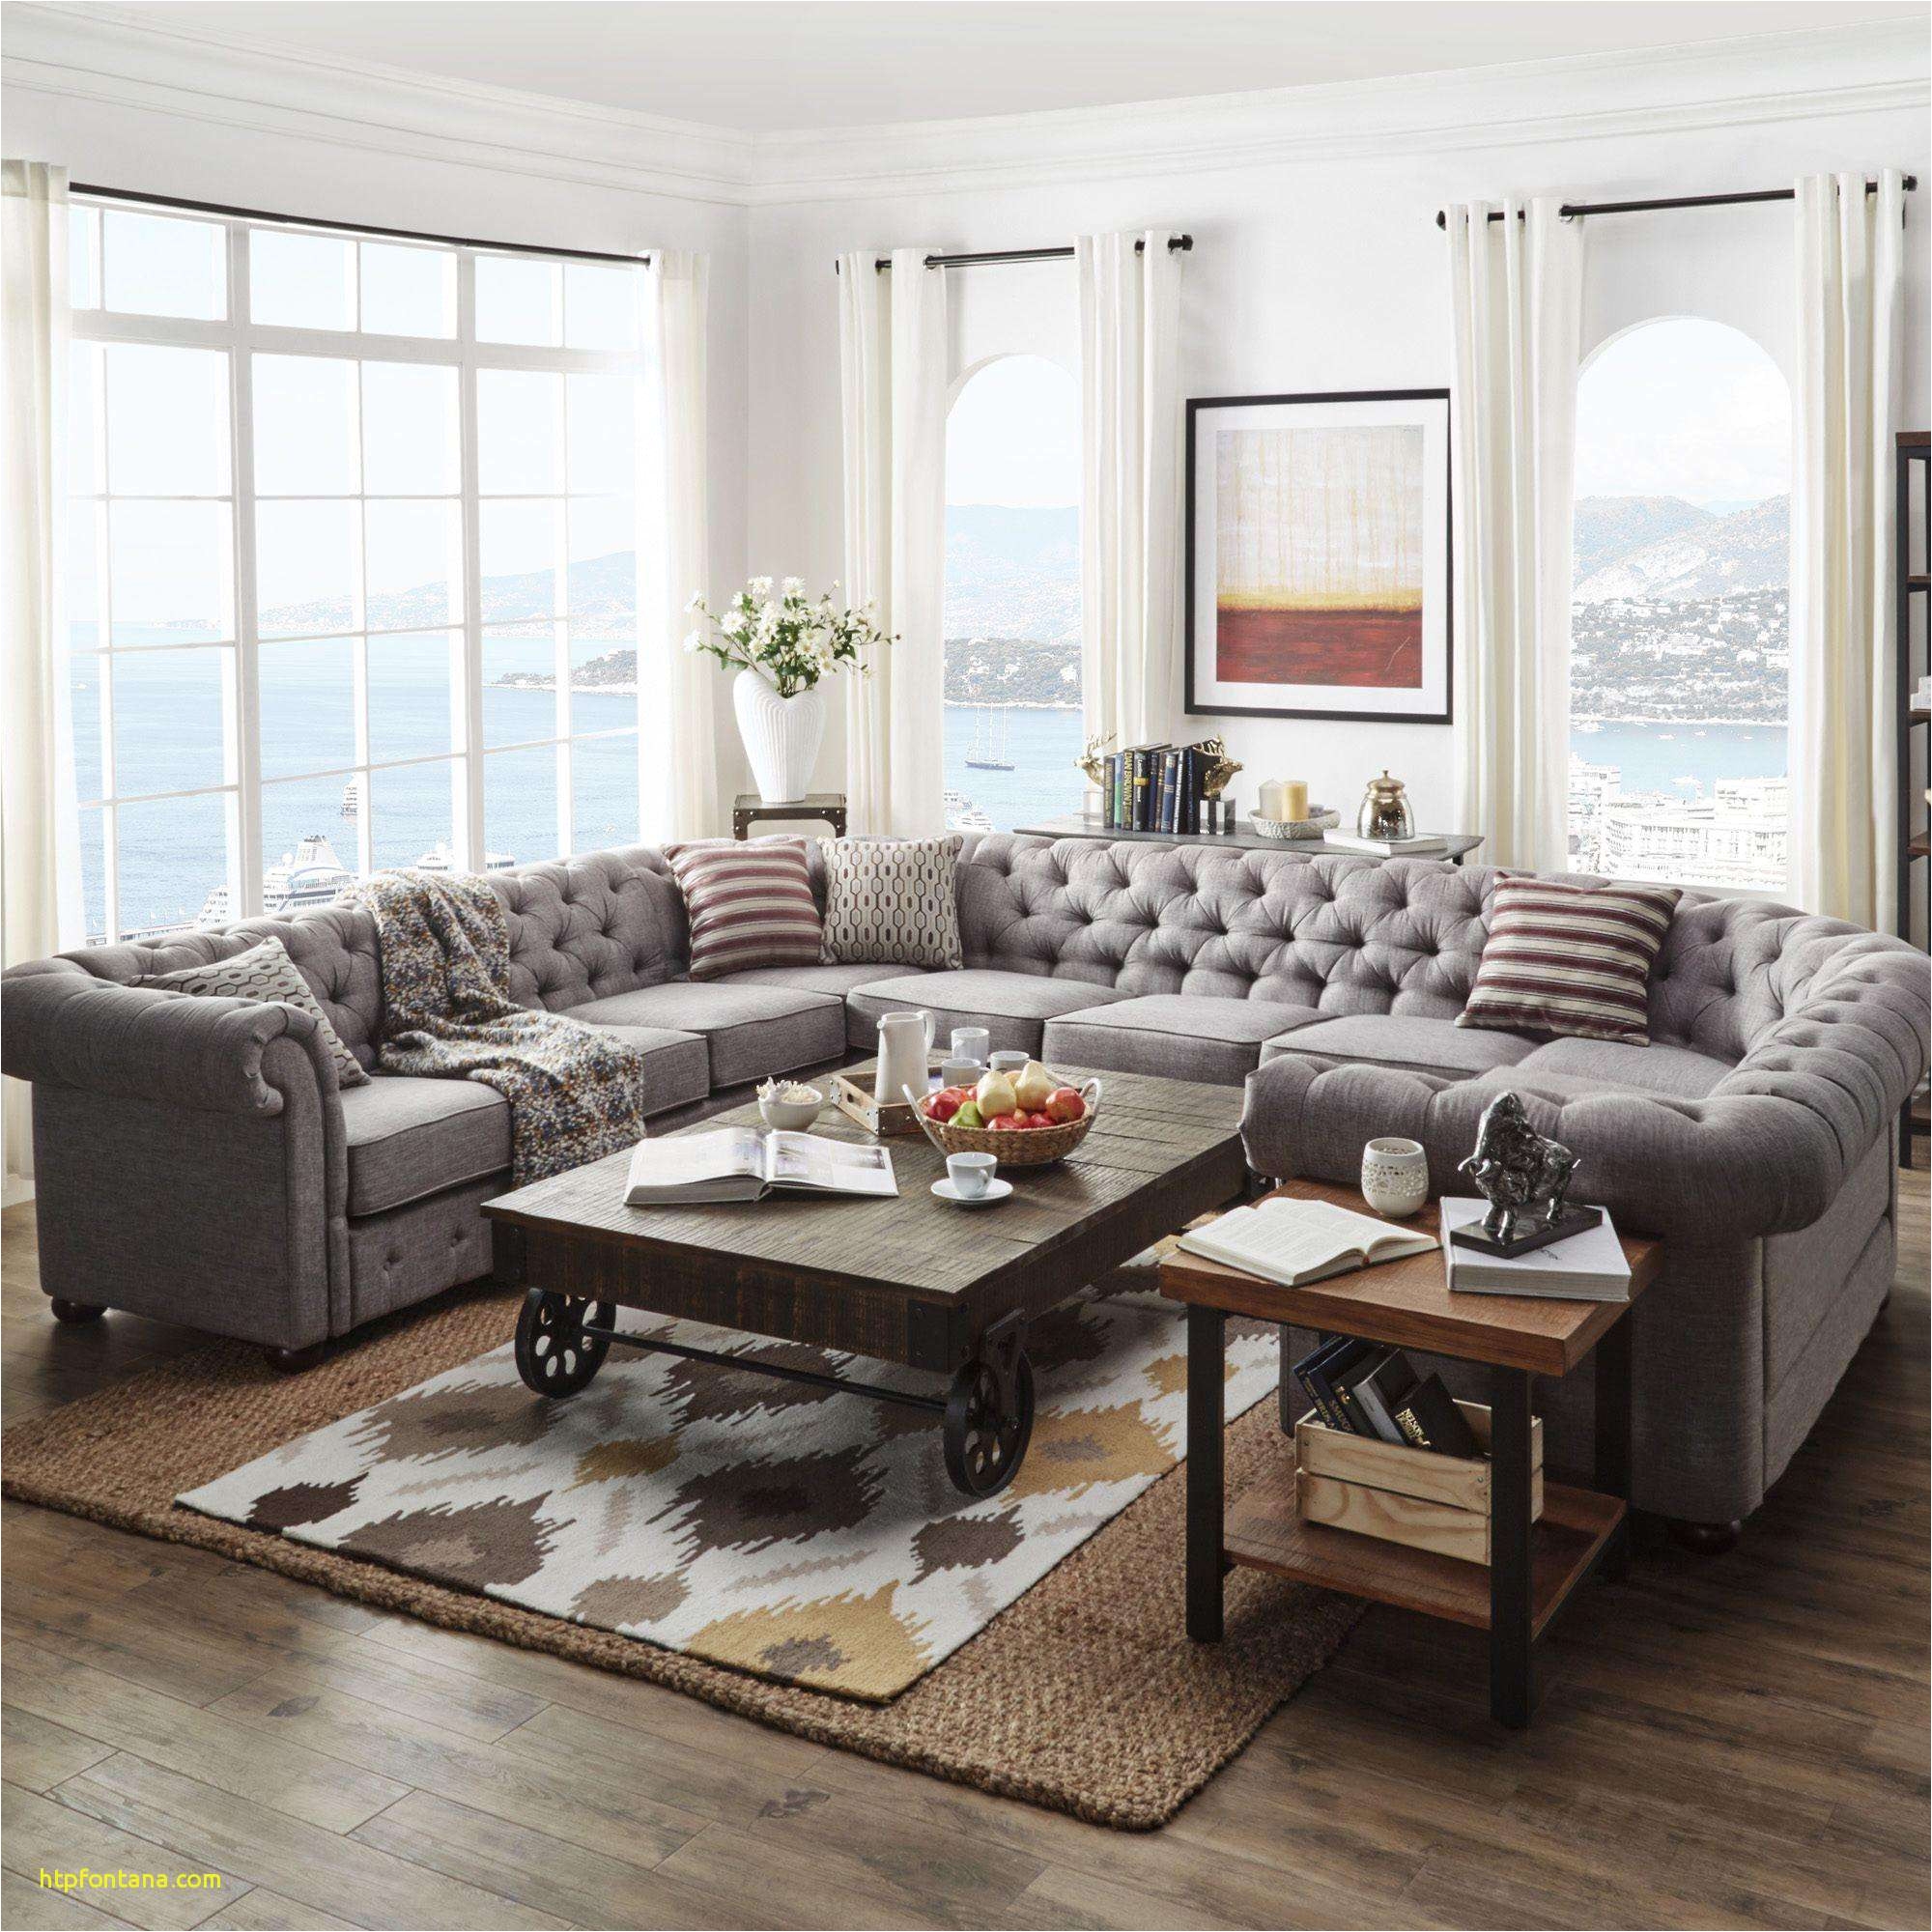 living room coffee table sets beautiful living room idea pics new furniture tufted loveseat 0d furnitures